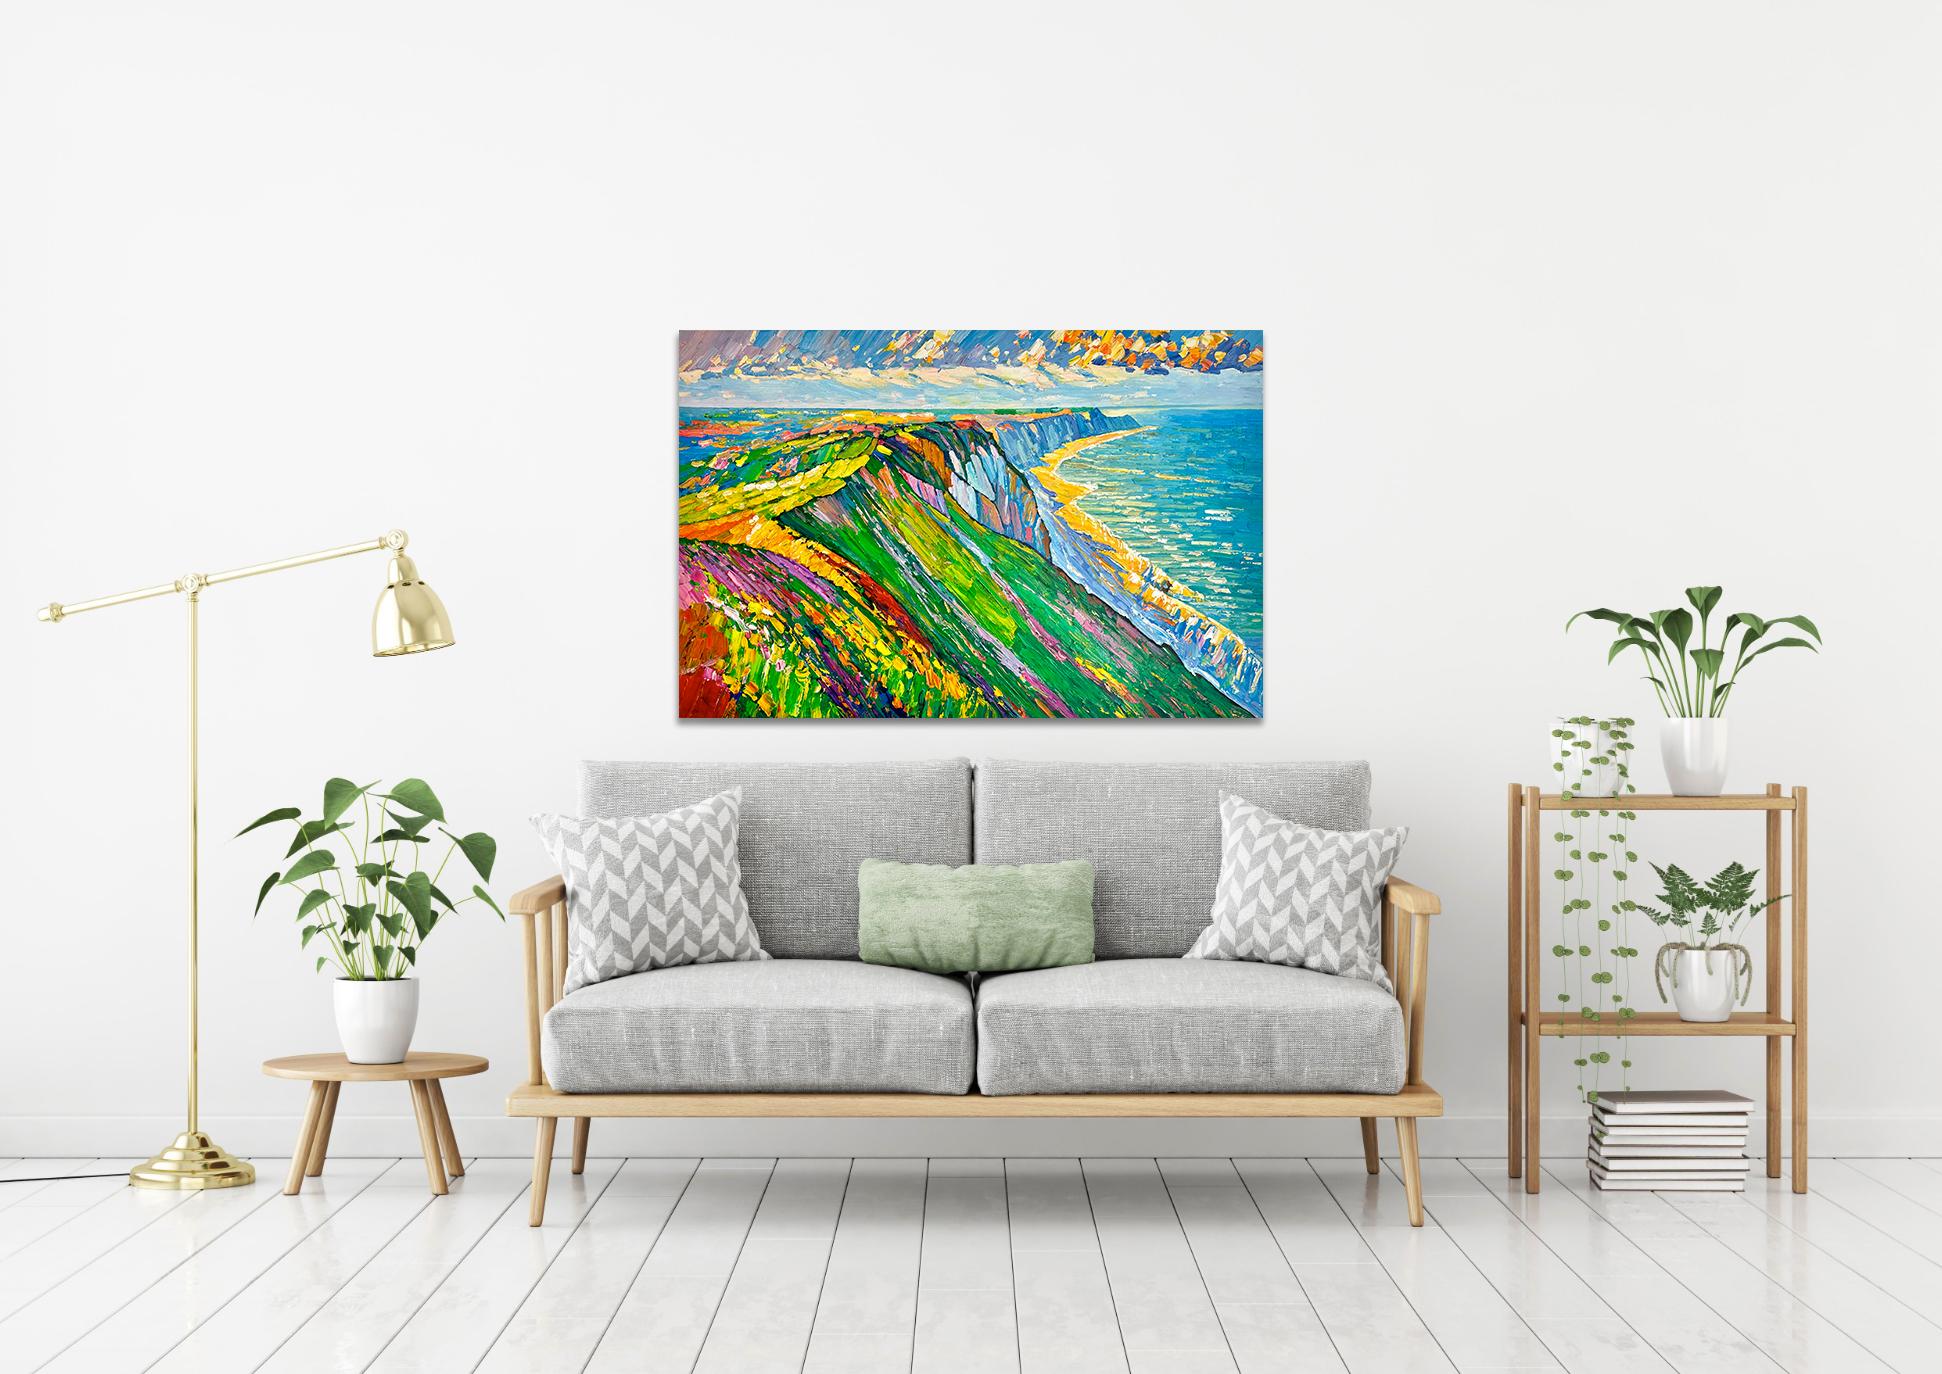 The Ocean's Roar  - Katharina Husslein Colorful Impasto Oil Landscape Painting For Sale 8